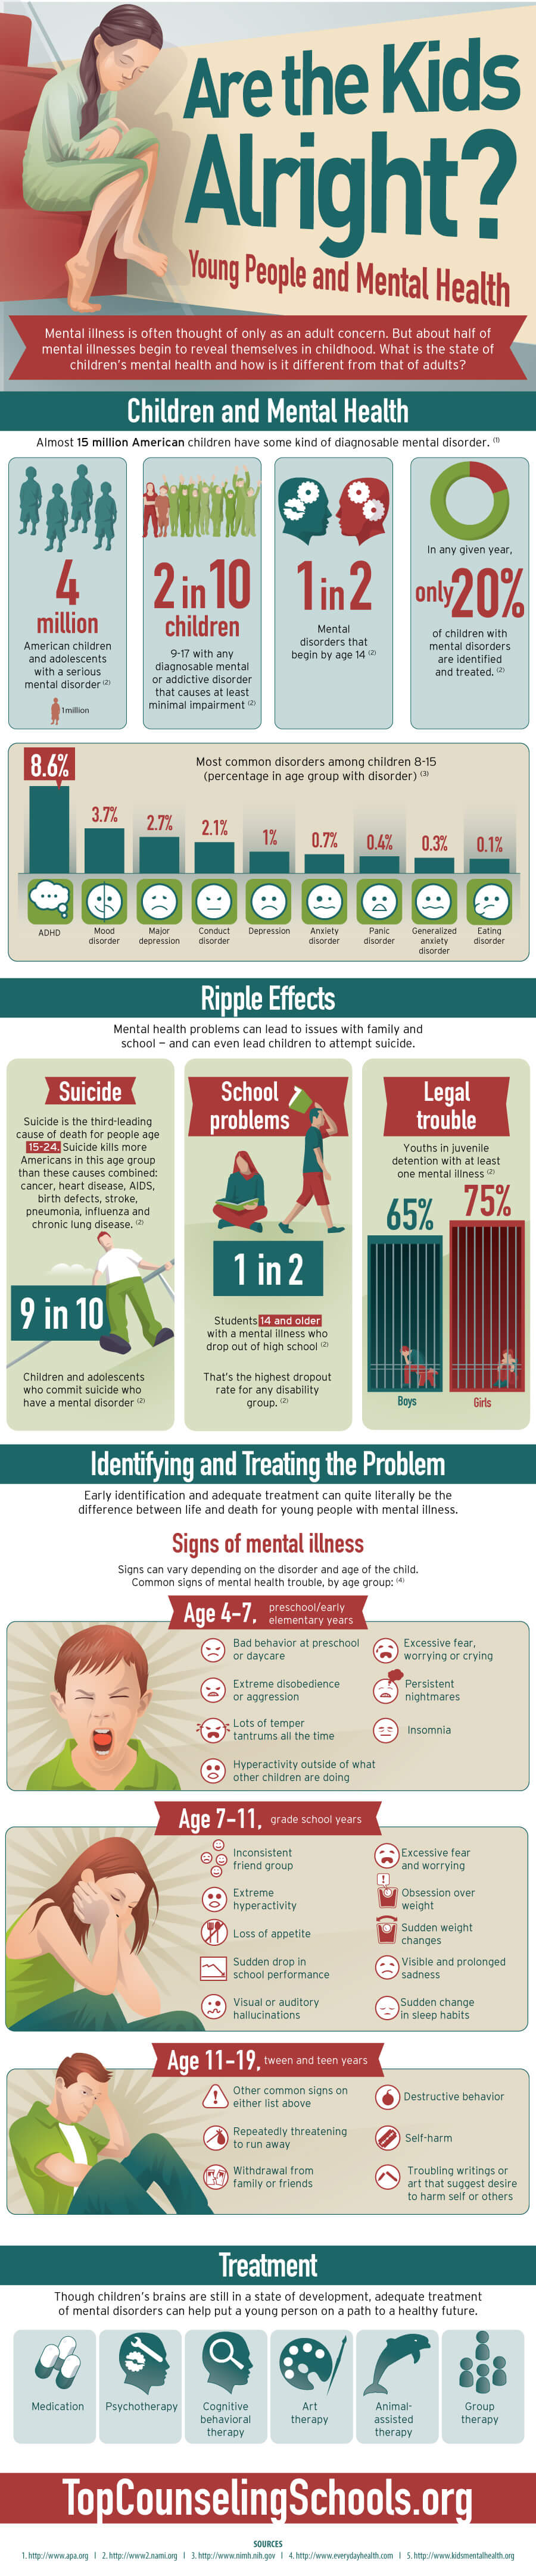 Are the Kids Alright? Young People and Mental Health